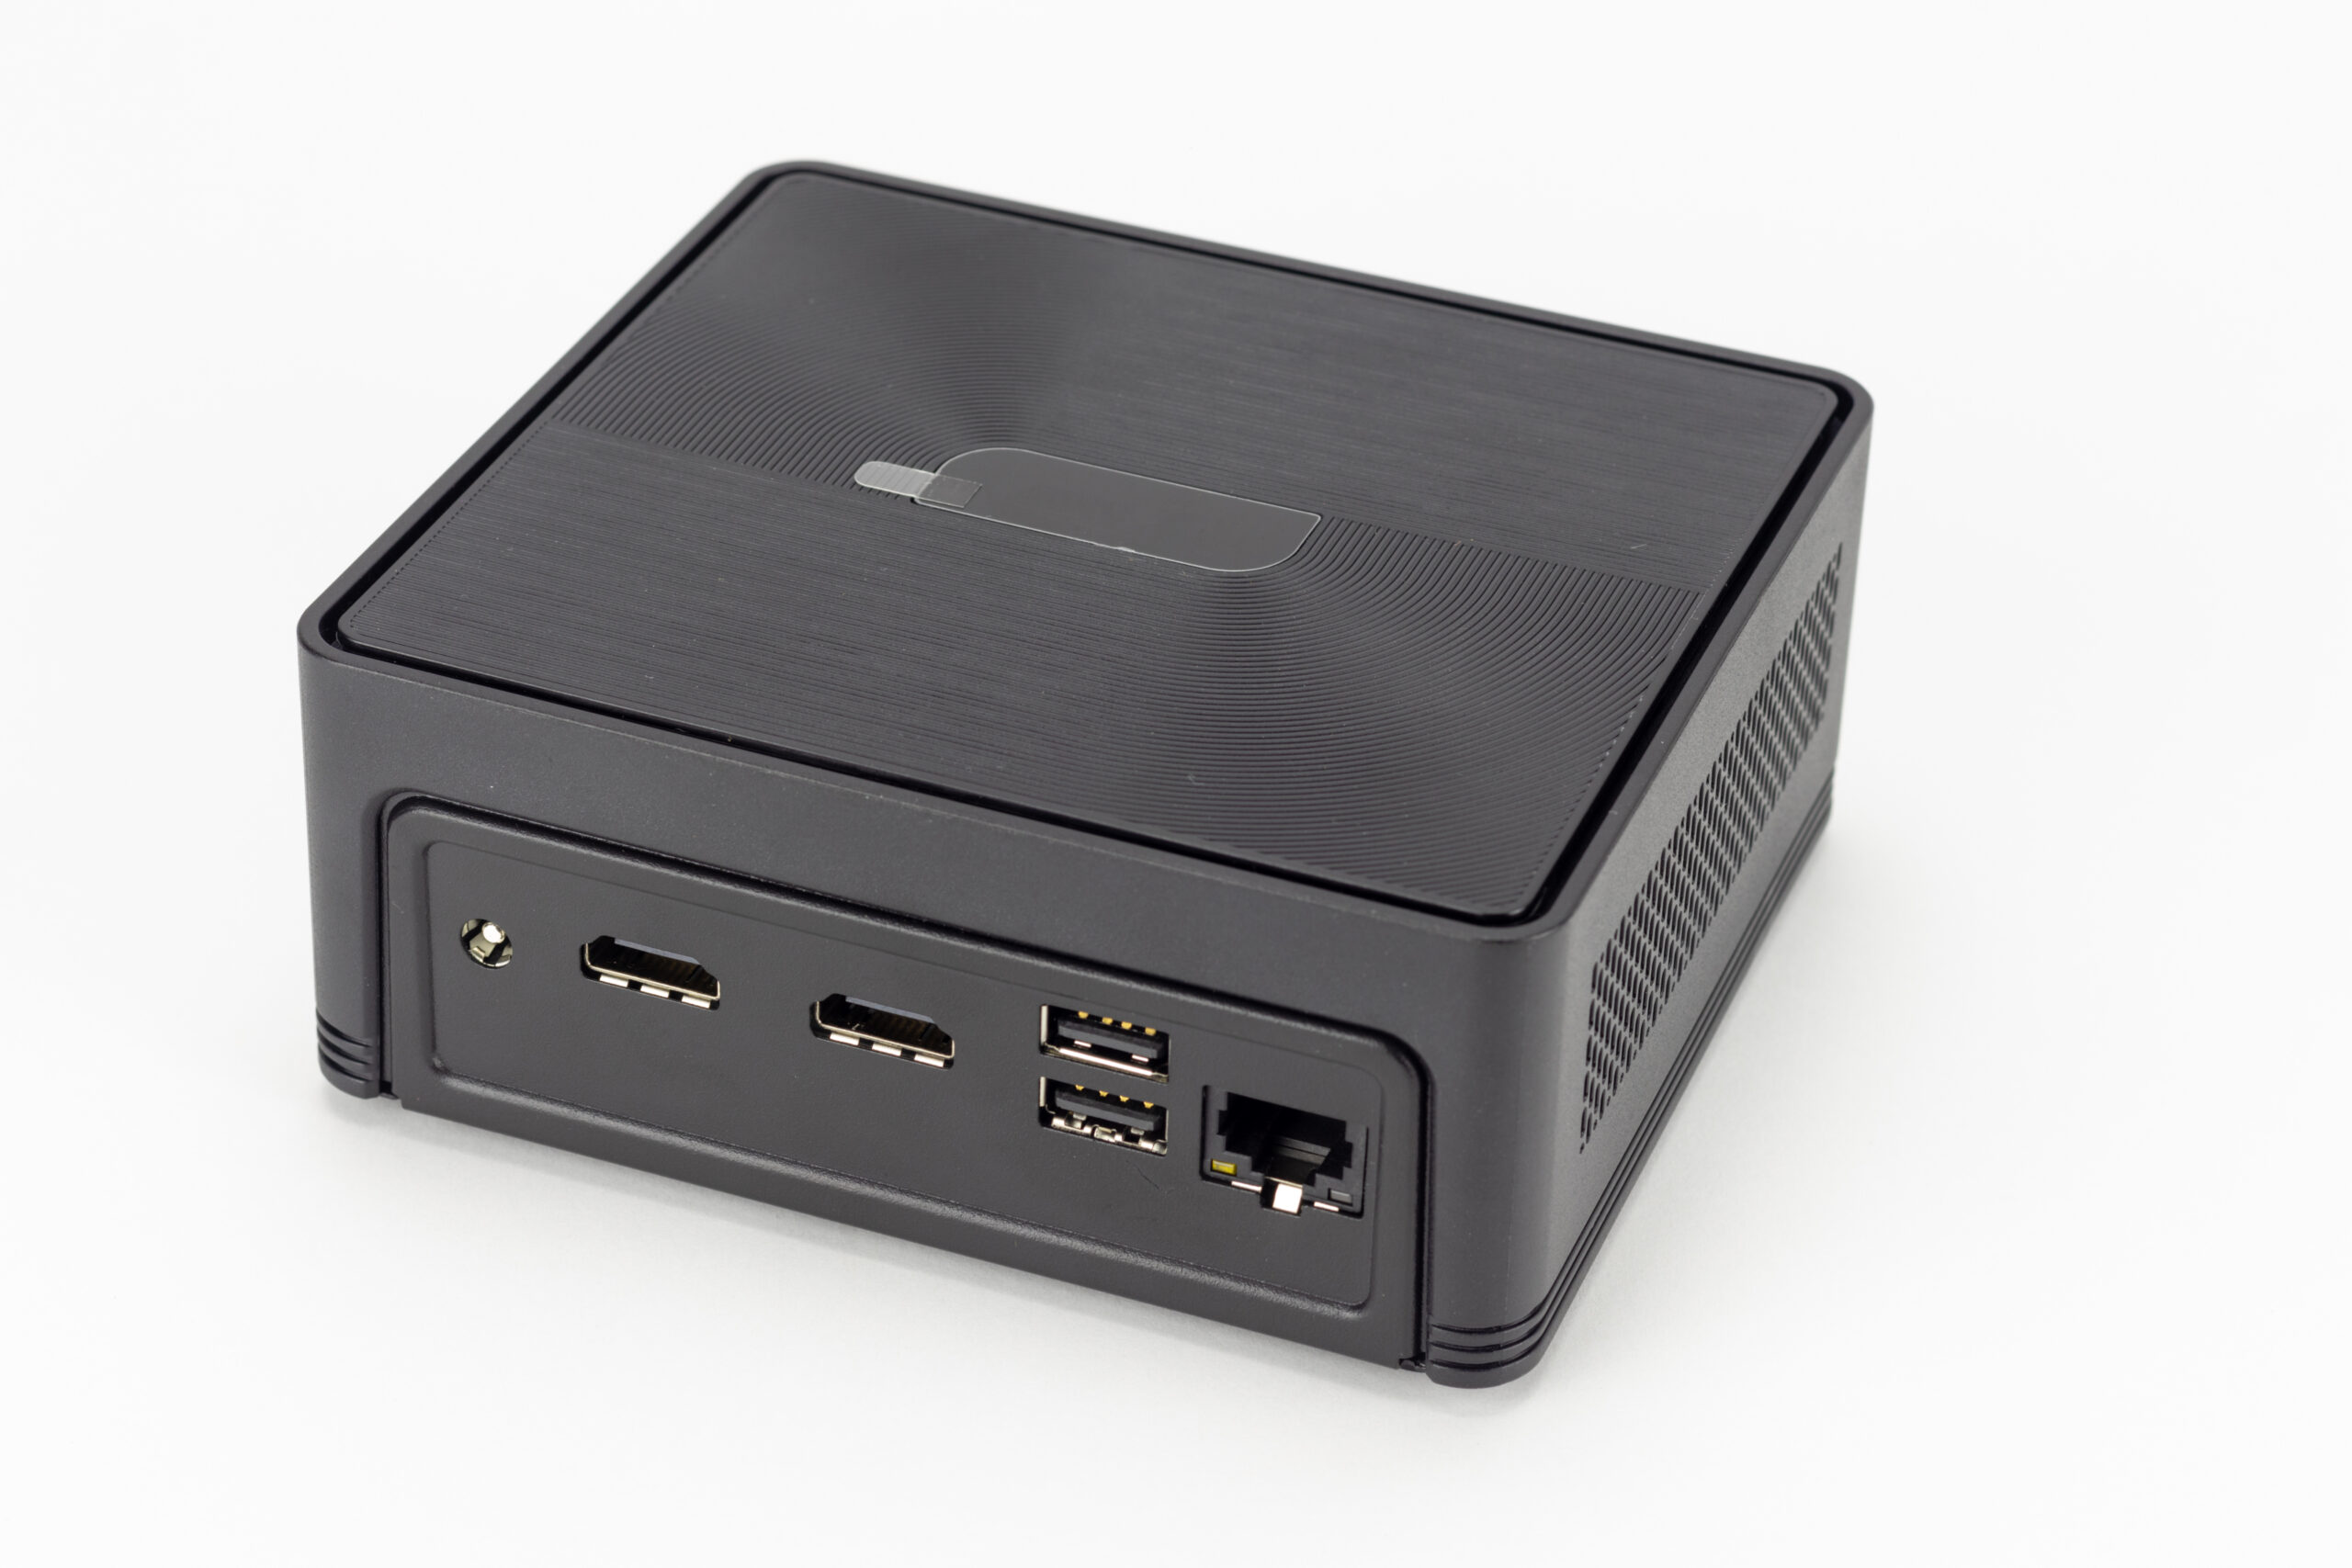 Geek insider, geekinsider, geekinsider. Com,, 10 things about mini pcs you should consider before buying, windows